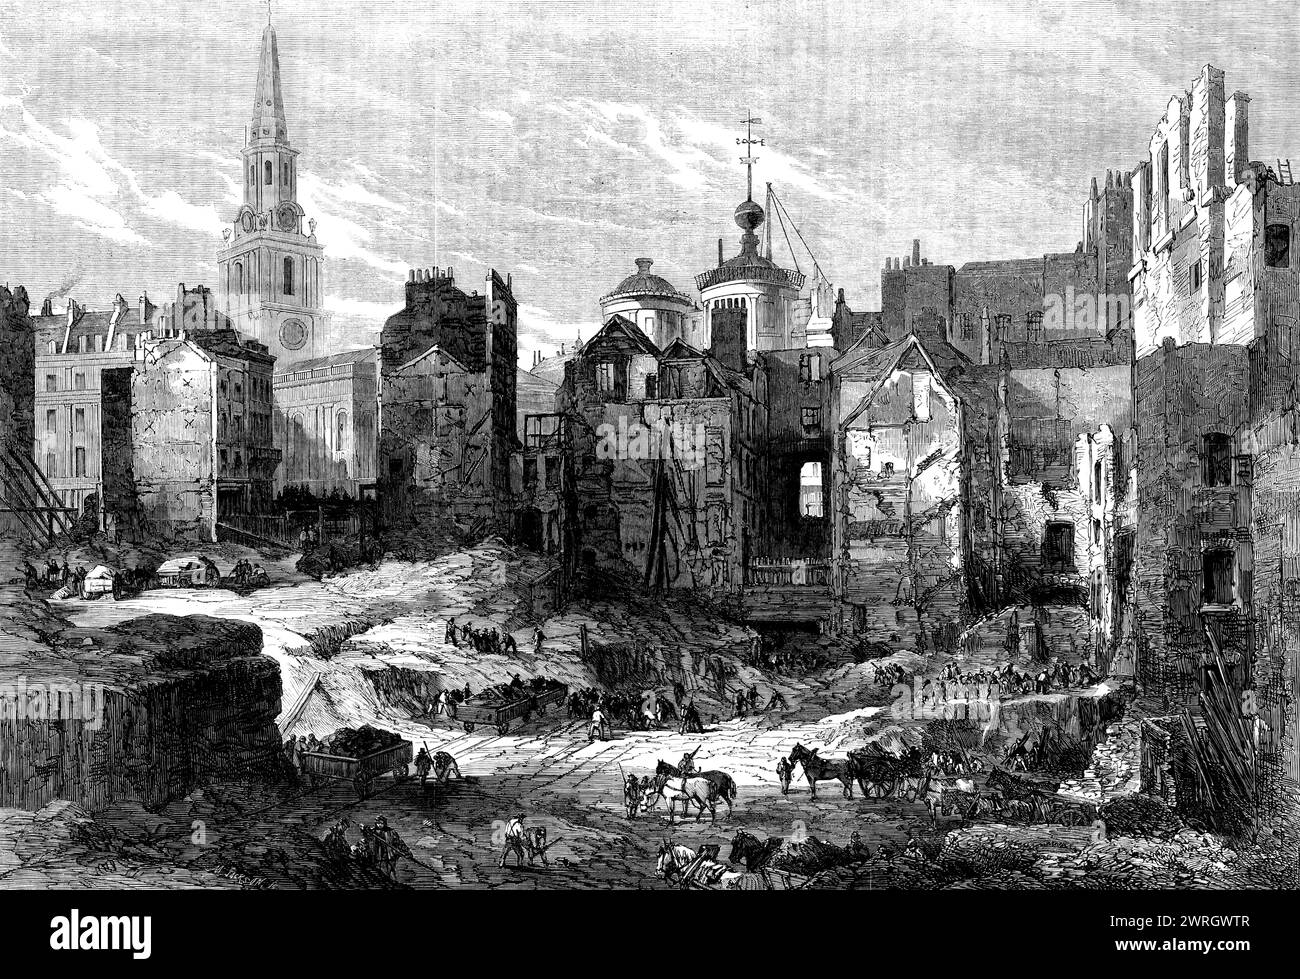 Demolition of Hungerford Market: view looking towards the Strand, [London], 1862. 'The disappearance of Hungerford Market...is perhaps not a subject of much, if any, regret...On its site there is about to rise a grand West-end Metropolitan Railway terminus [Charing Cross station]...The structure which has been recently demolished occupied the site of a market-place built in 1608 by Sir Edward Hungerford...the old hall and a colonnade remained until about 1830...[when] the late building was erected...there was a dreary makeshift aspect even in the corridors of the quadrangles...But the car of t Stock Photo